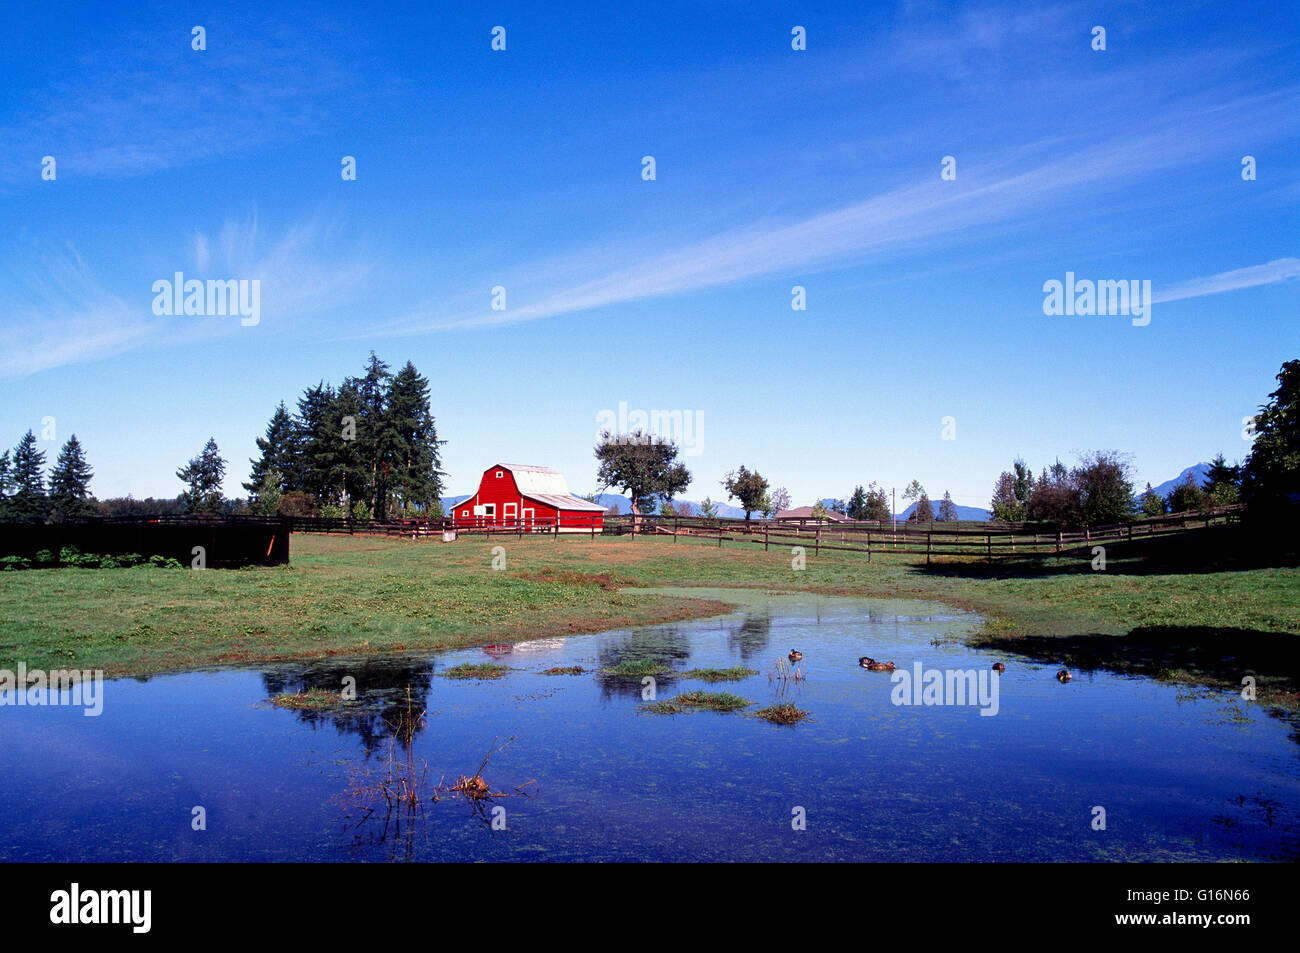 Fraser Valley, Langley, BC, British Columbia, Canada - Red Barn on Farm in Rural Agriculture Landscape Stock Photo